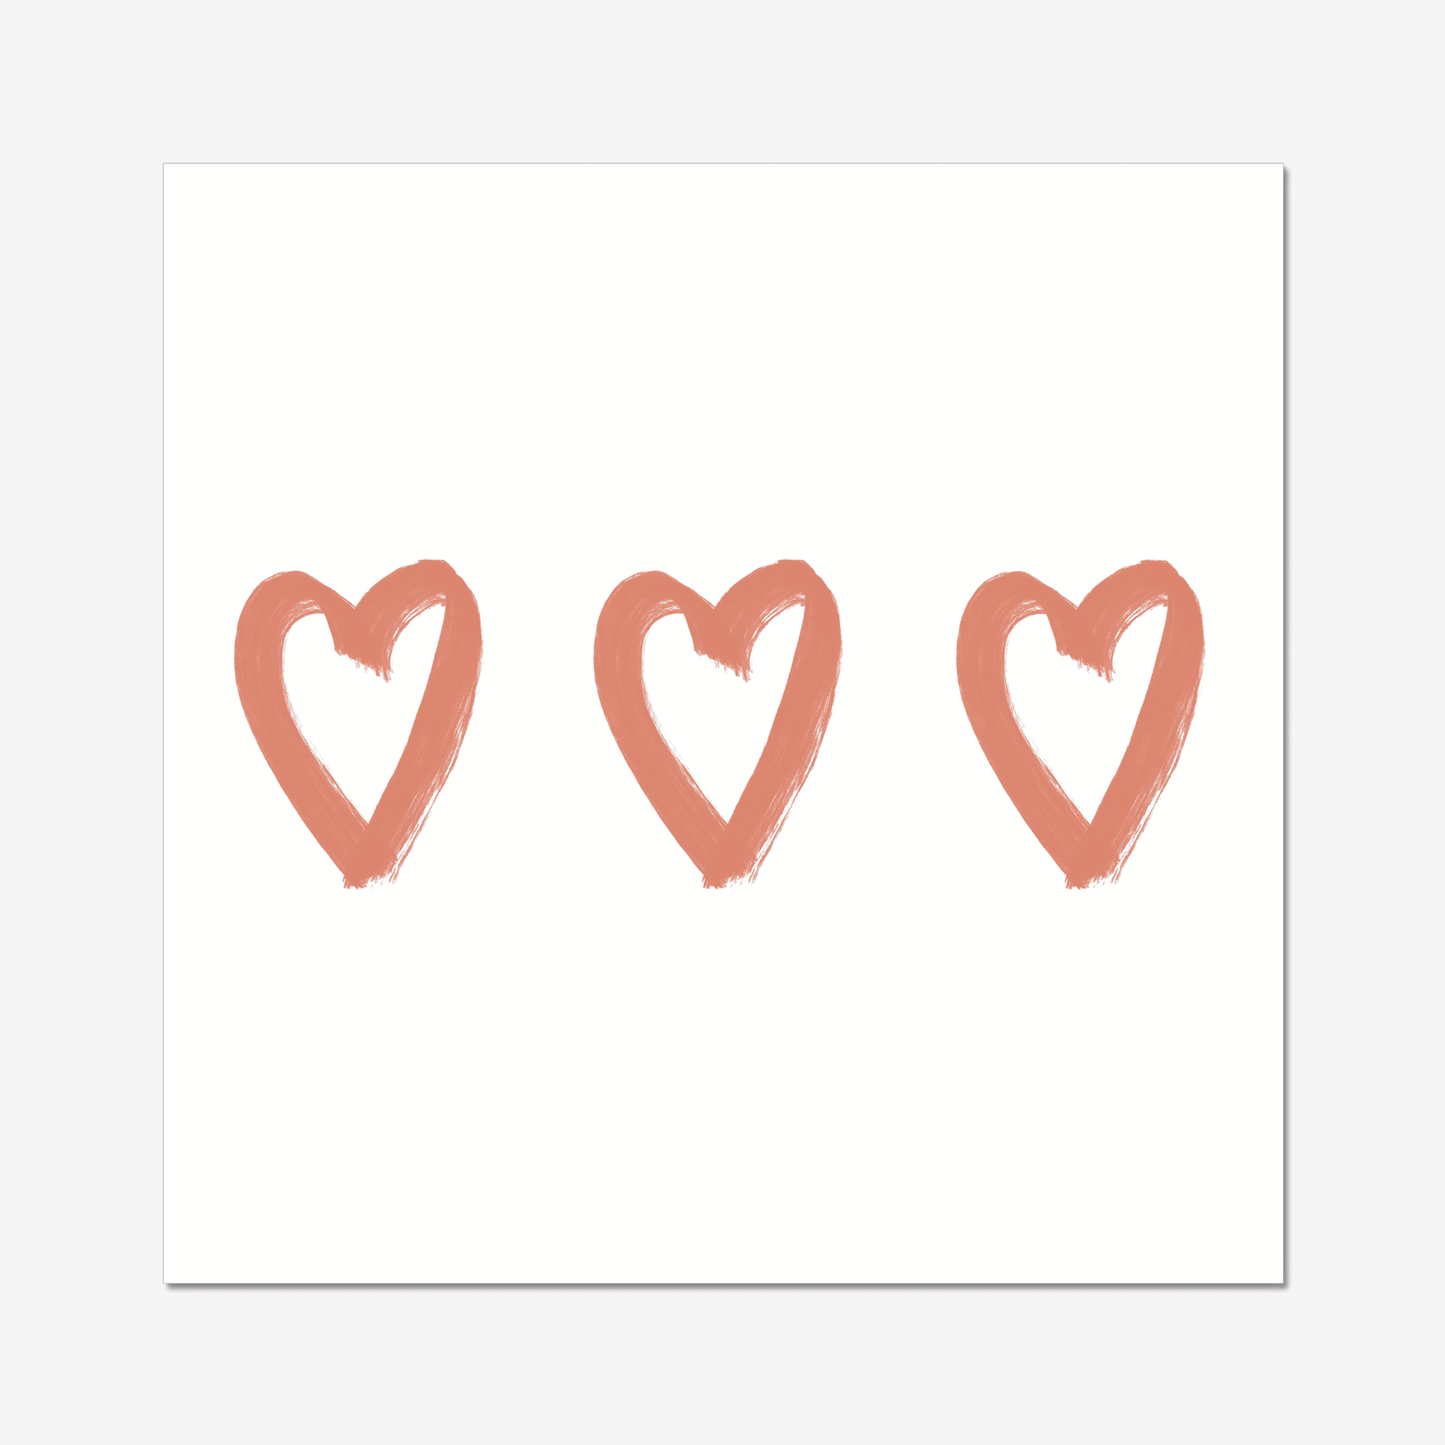 A simple design, but so very beautiful.  Three coral hearts, in an oil paint style on a plain background. This print is perfect in a laid back, boho, californian decor styled home.   A popular choice in nurseries too, we've sent this print to many a first time parent - when two become three